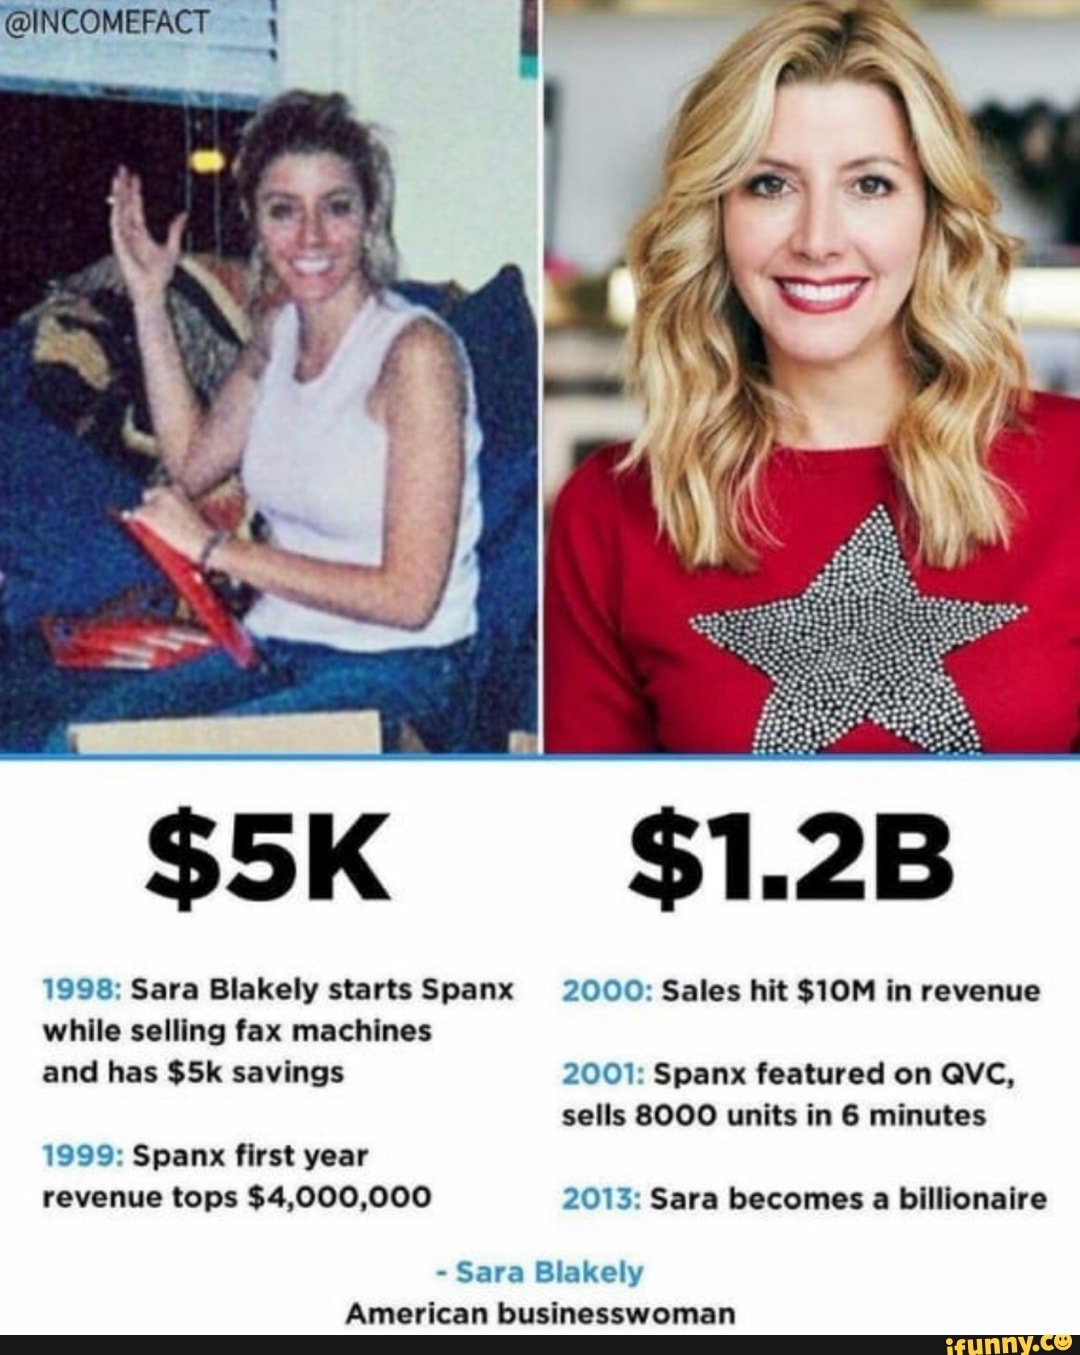 $1.2B 1998: Sara Blakely starts Spanx 2000: Sales hit SIOM in revenue  @INCOMEFACT while selling